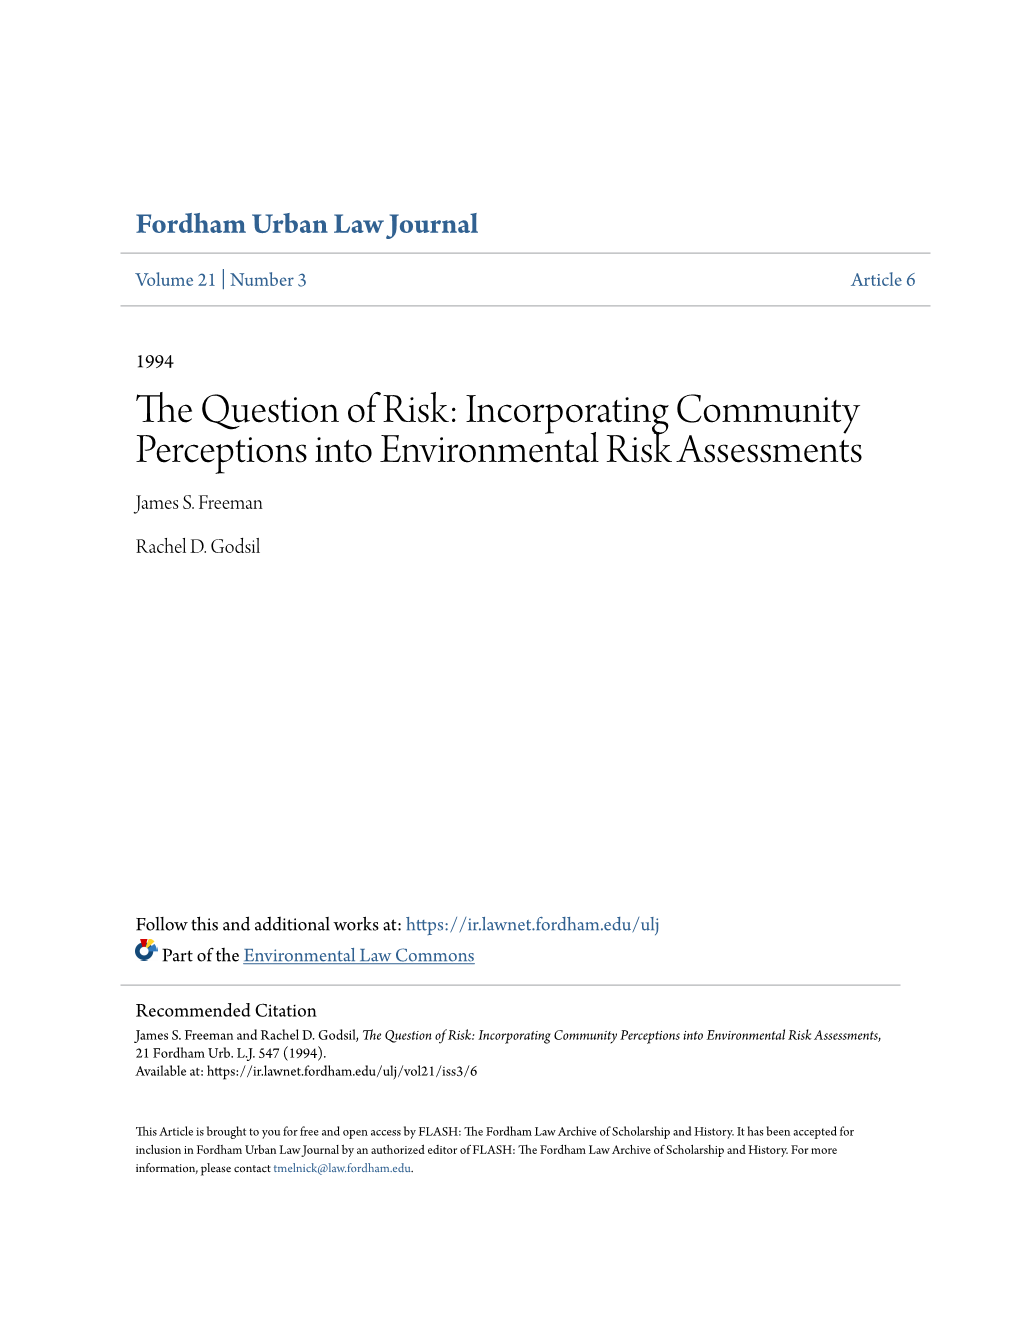 Incorporating Community Perceptions Into Environmental Risk Assessments James S